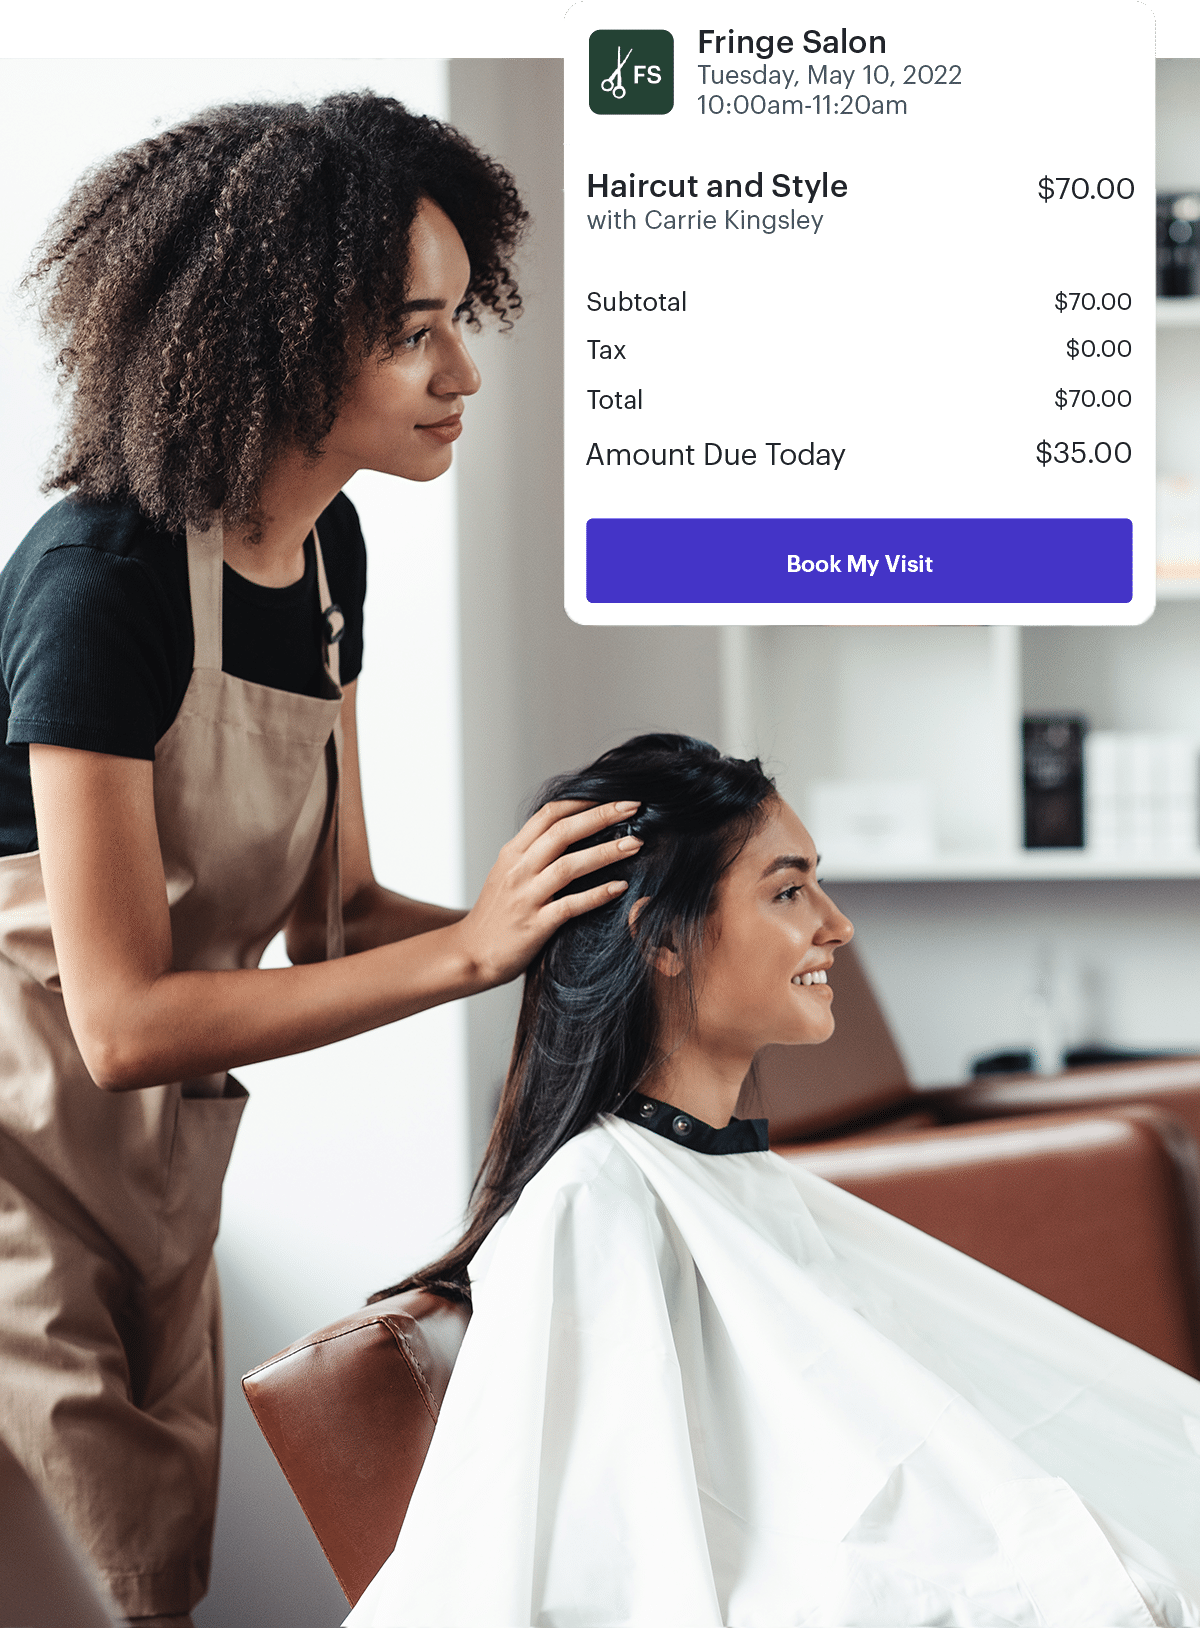 Image of a stylist holding someone's head with Schedulicity's booking user interface featured in the upper corner